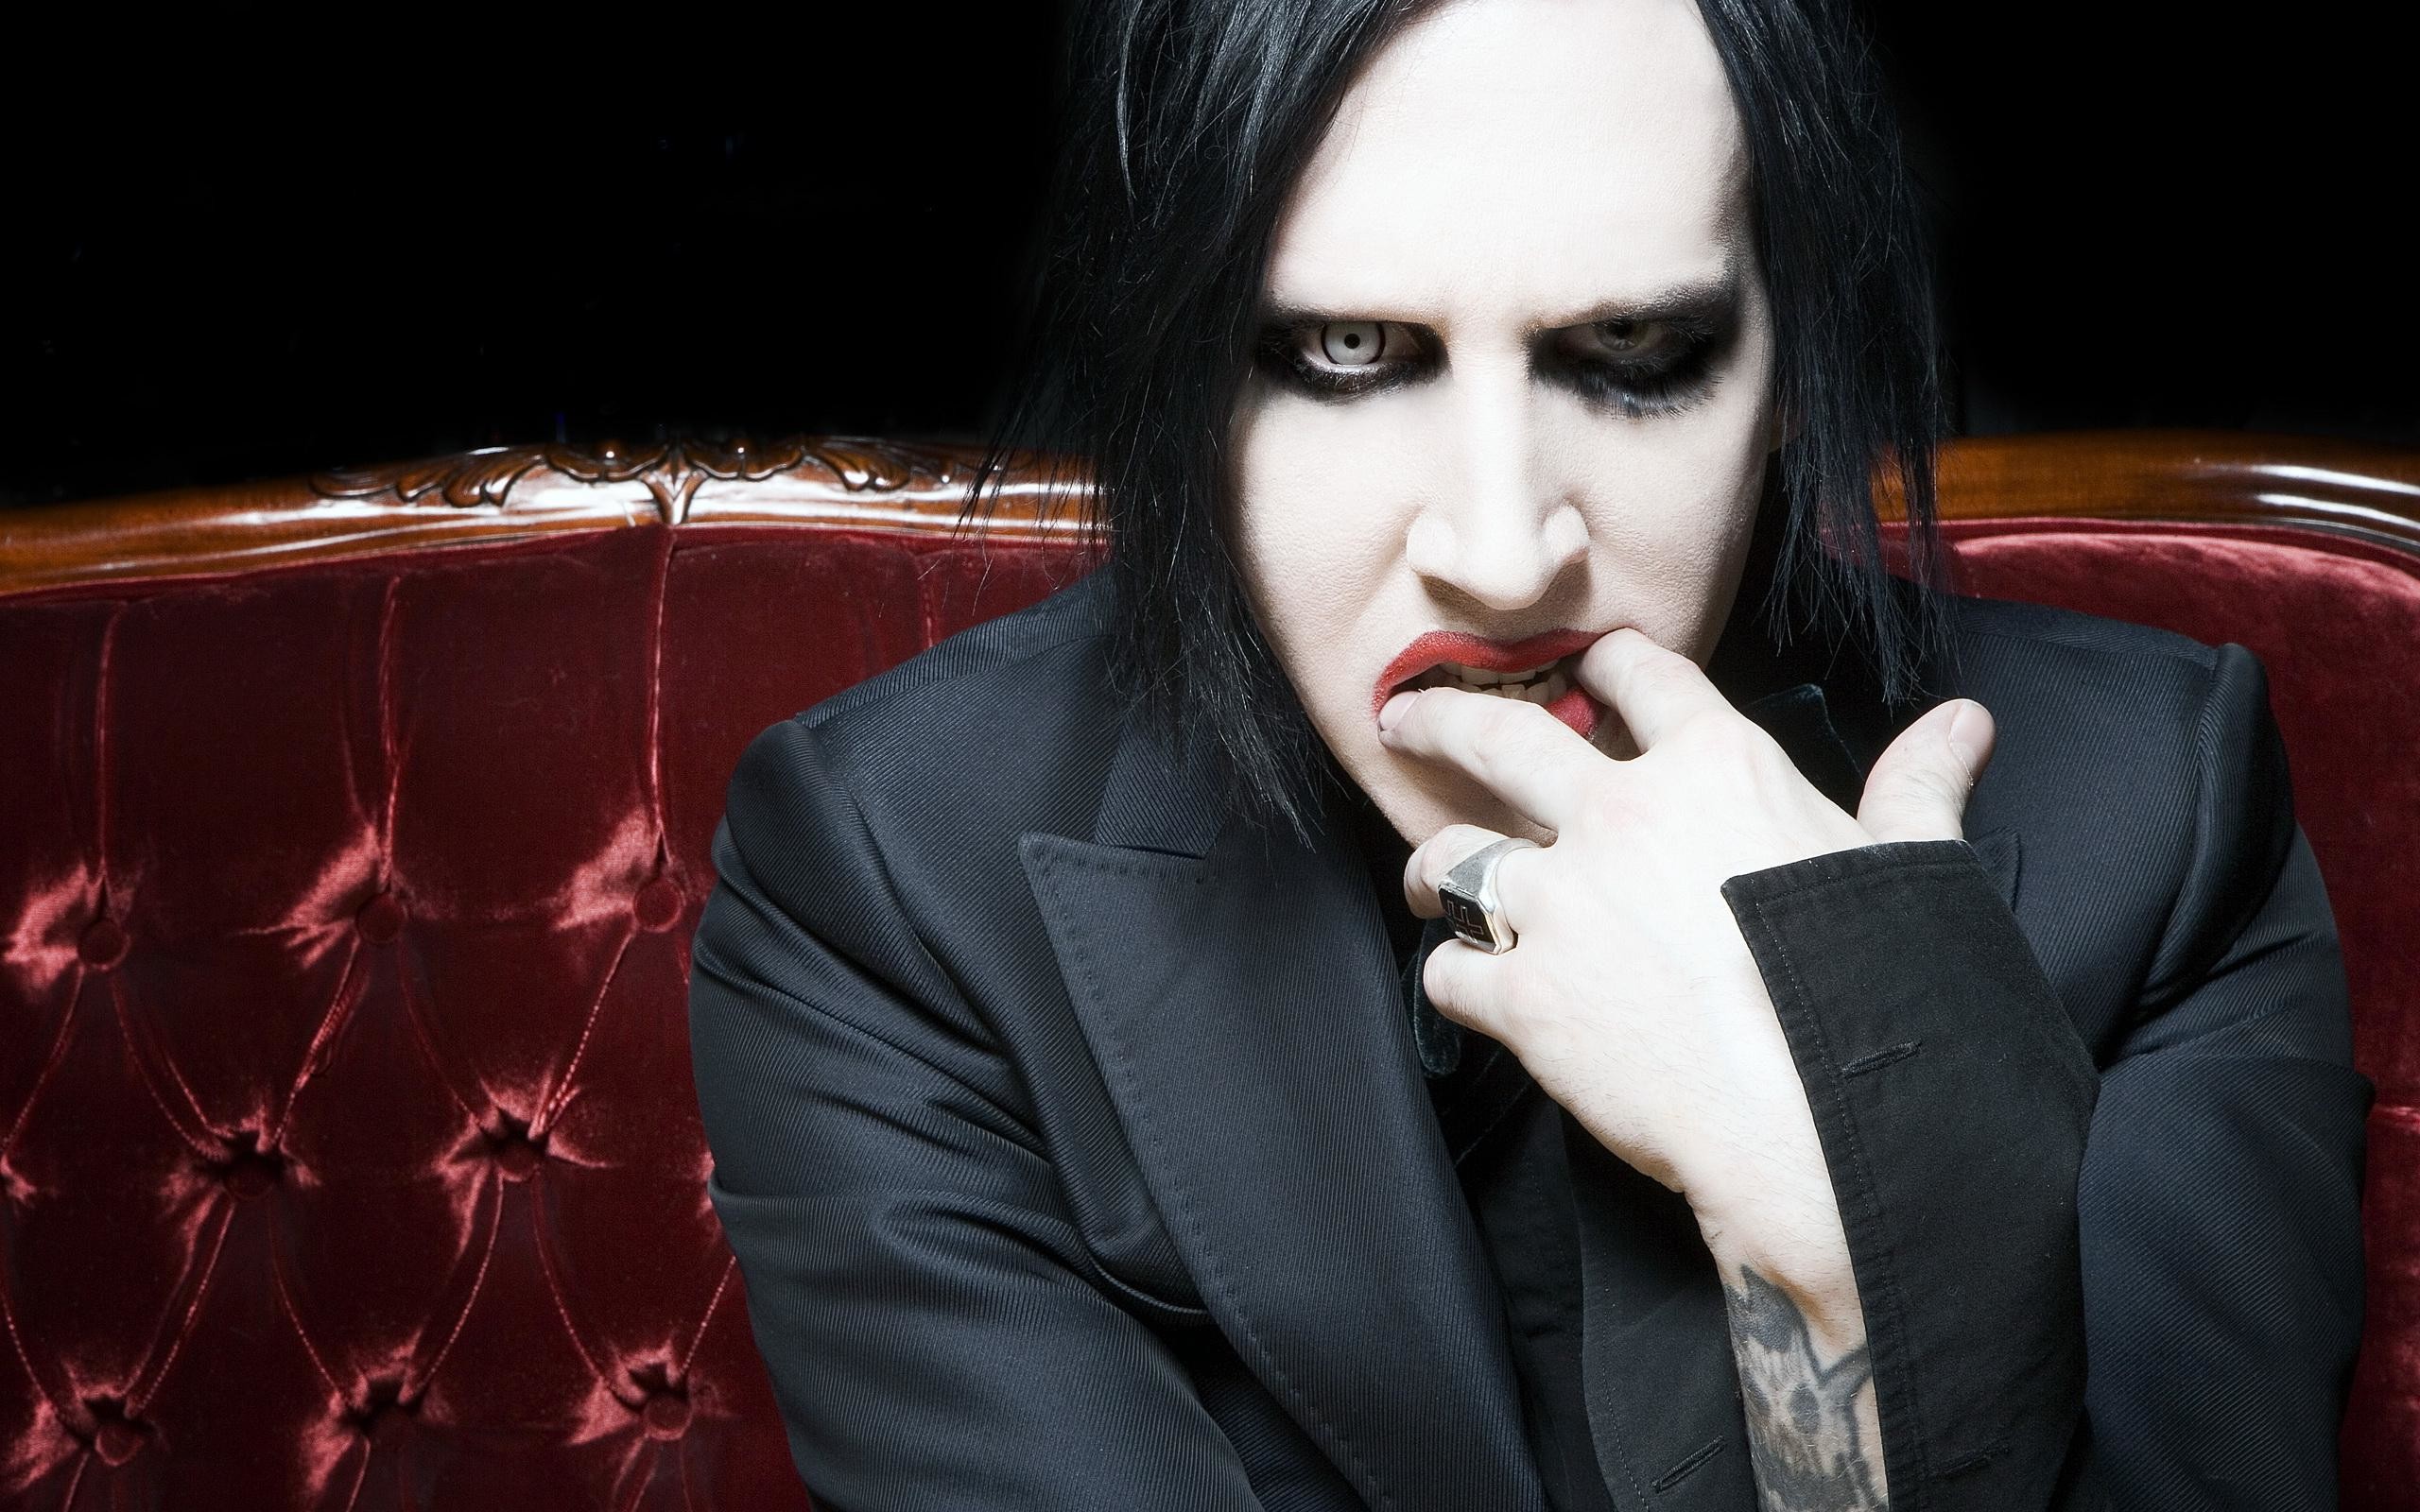 marilyn manson wallpaper,lip,mouth,black hair,photography,goth subculture